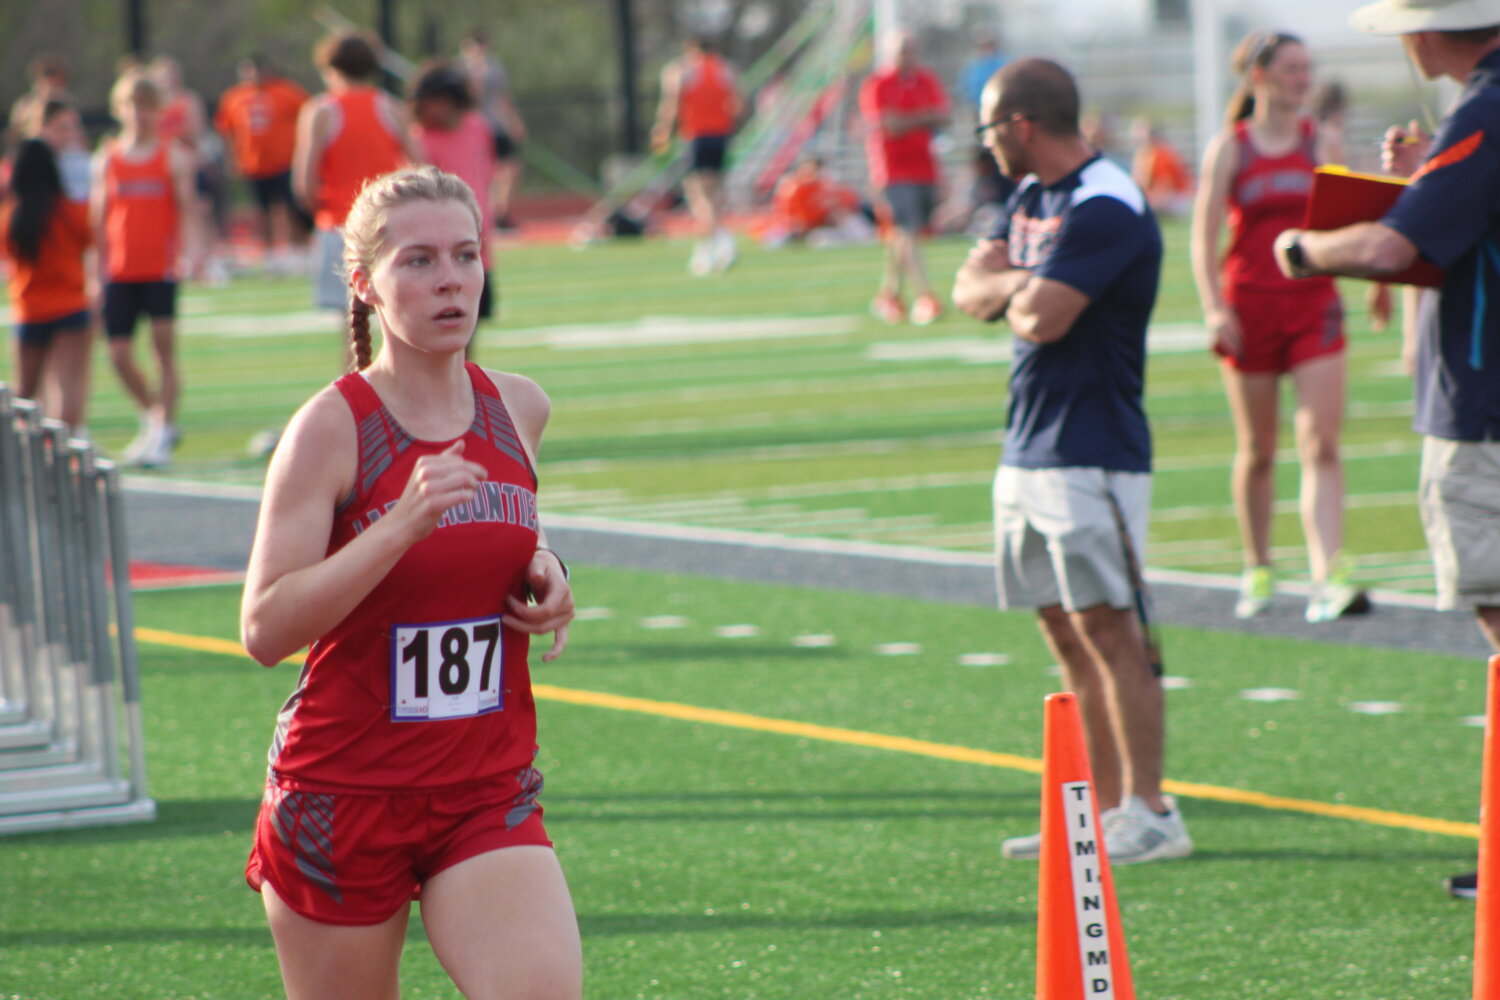 Faith Allen cruised to a first place finish in both the 1600 and 3200 meter runs for the Mounties.